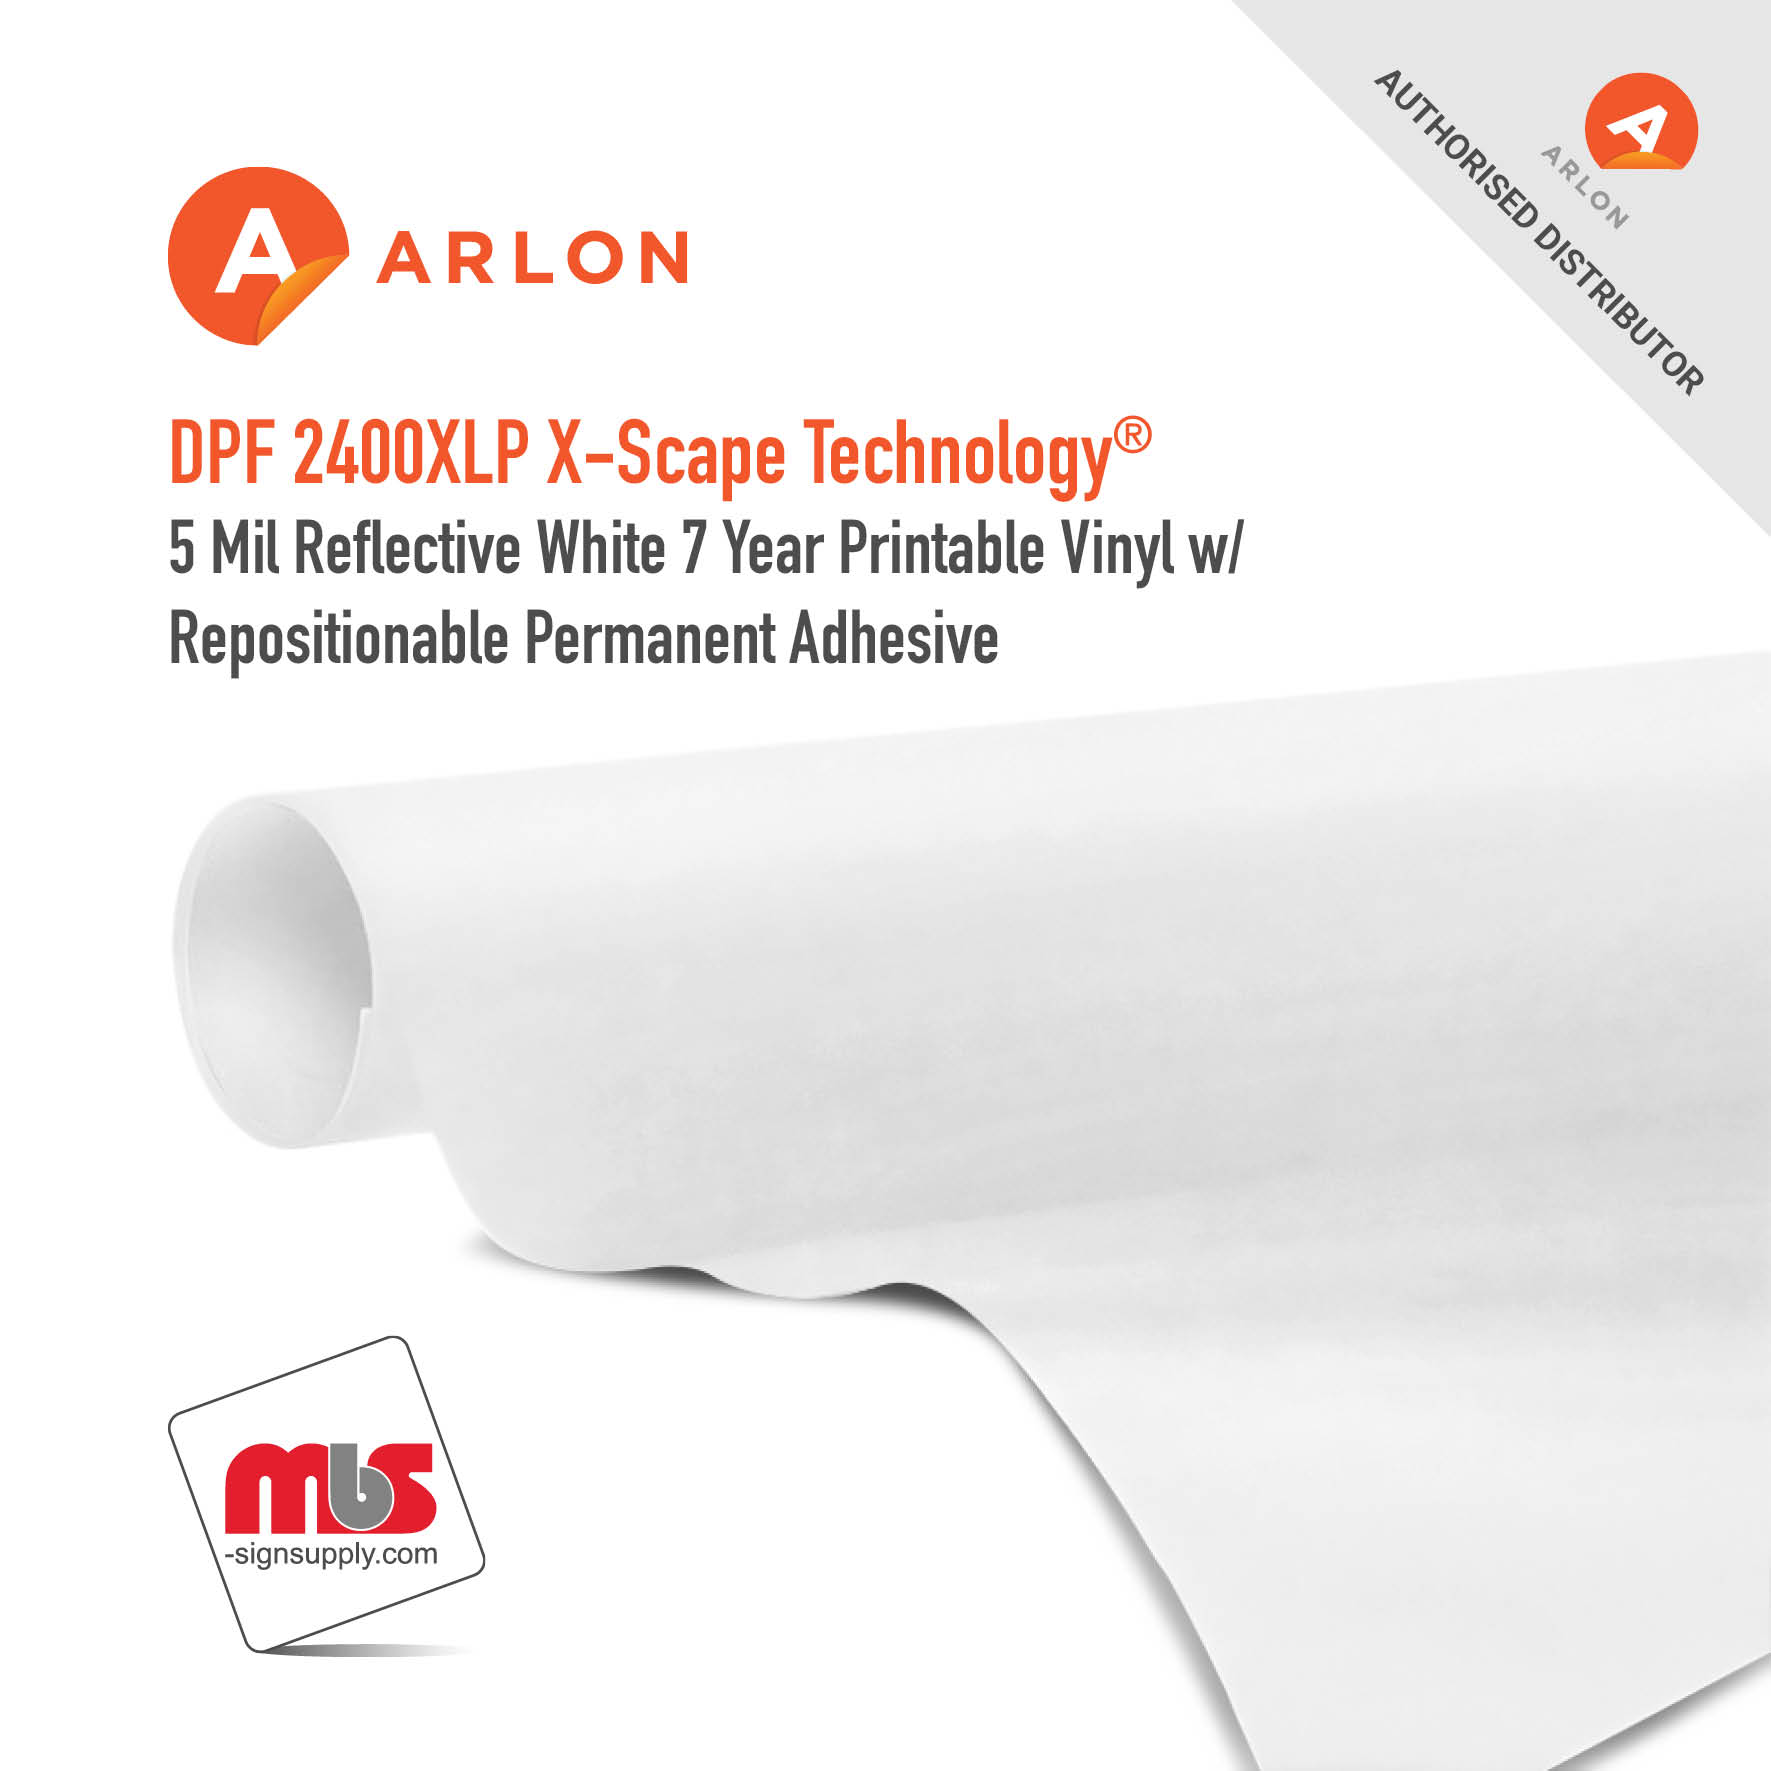 48'' x 50 Yard Roll - Arlon DPF 2400XLP X-Scape Technology® 5 Mil Reflective White 7 Year Printable Vinyl w/ Repositionable Permanent Adhesive